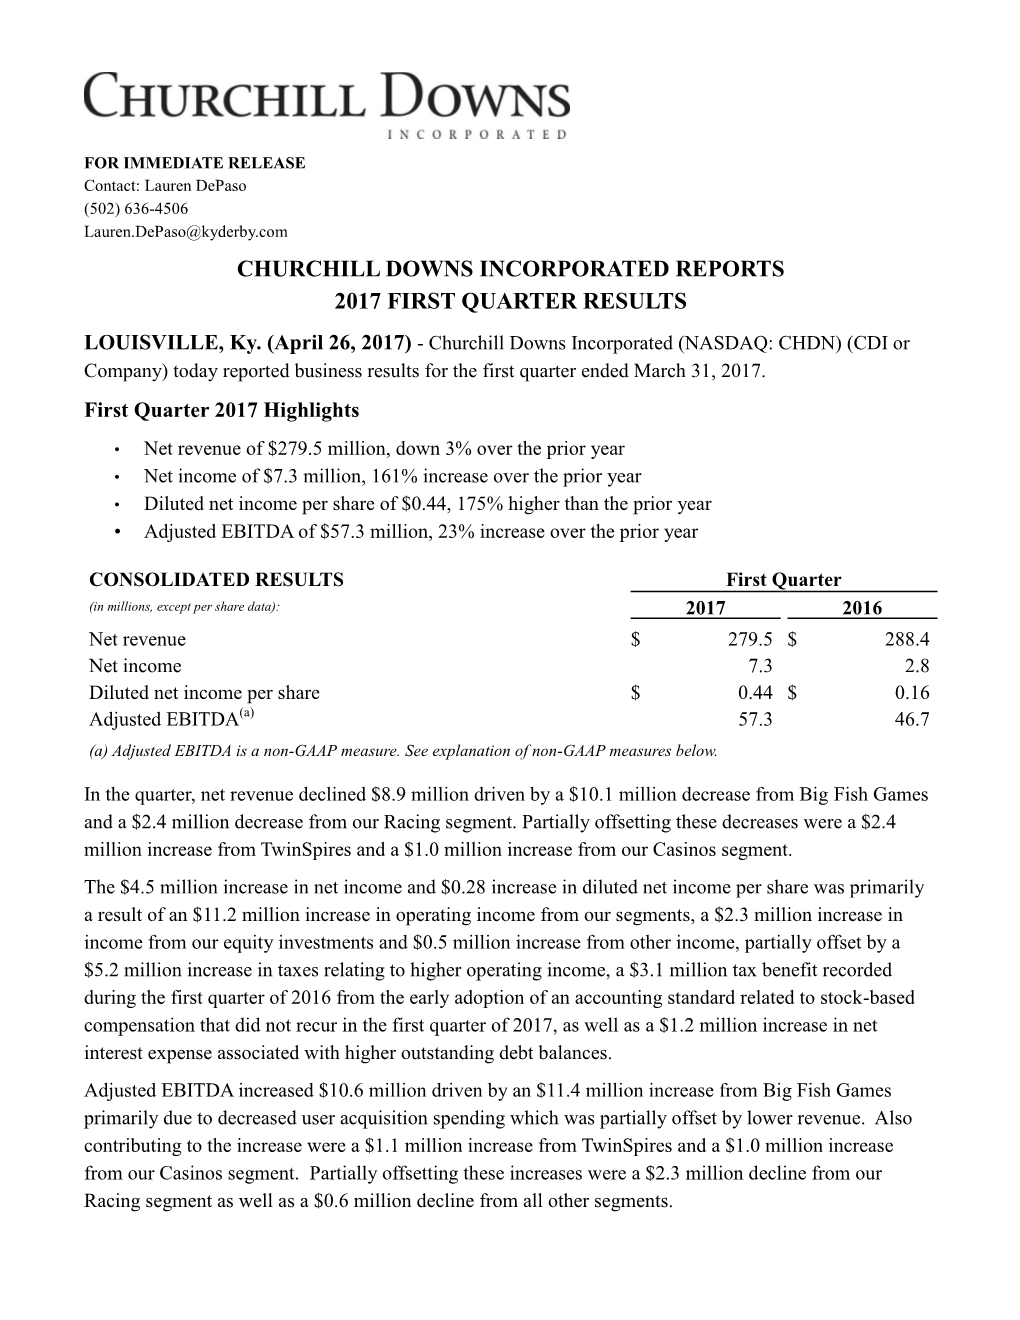 CHURCHILL DOWNS INCORPORATED REPORTS 2017 FIRST QUARTER RESULTS LOUISVILLE, Ky